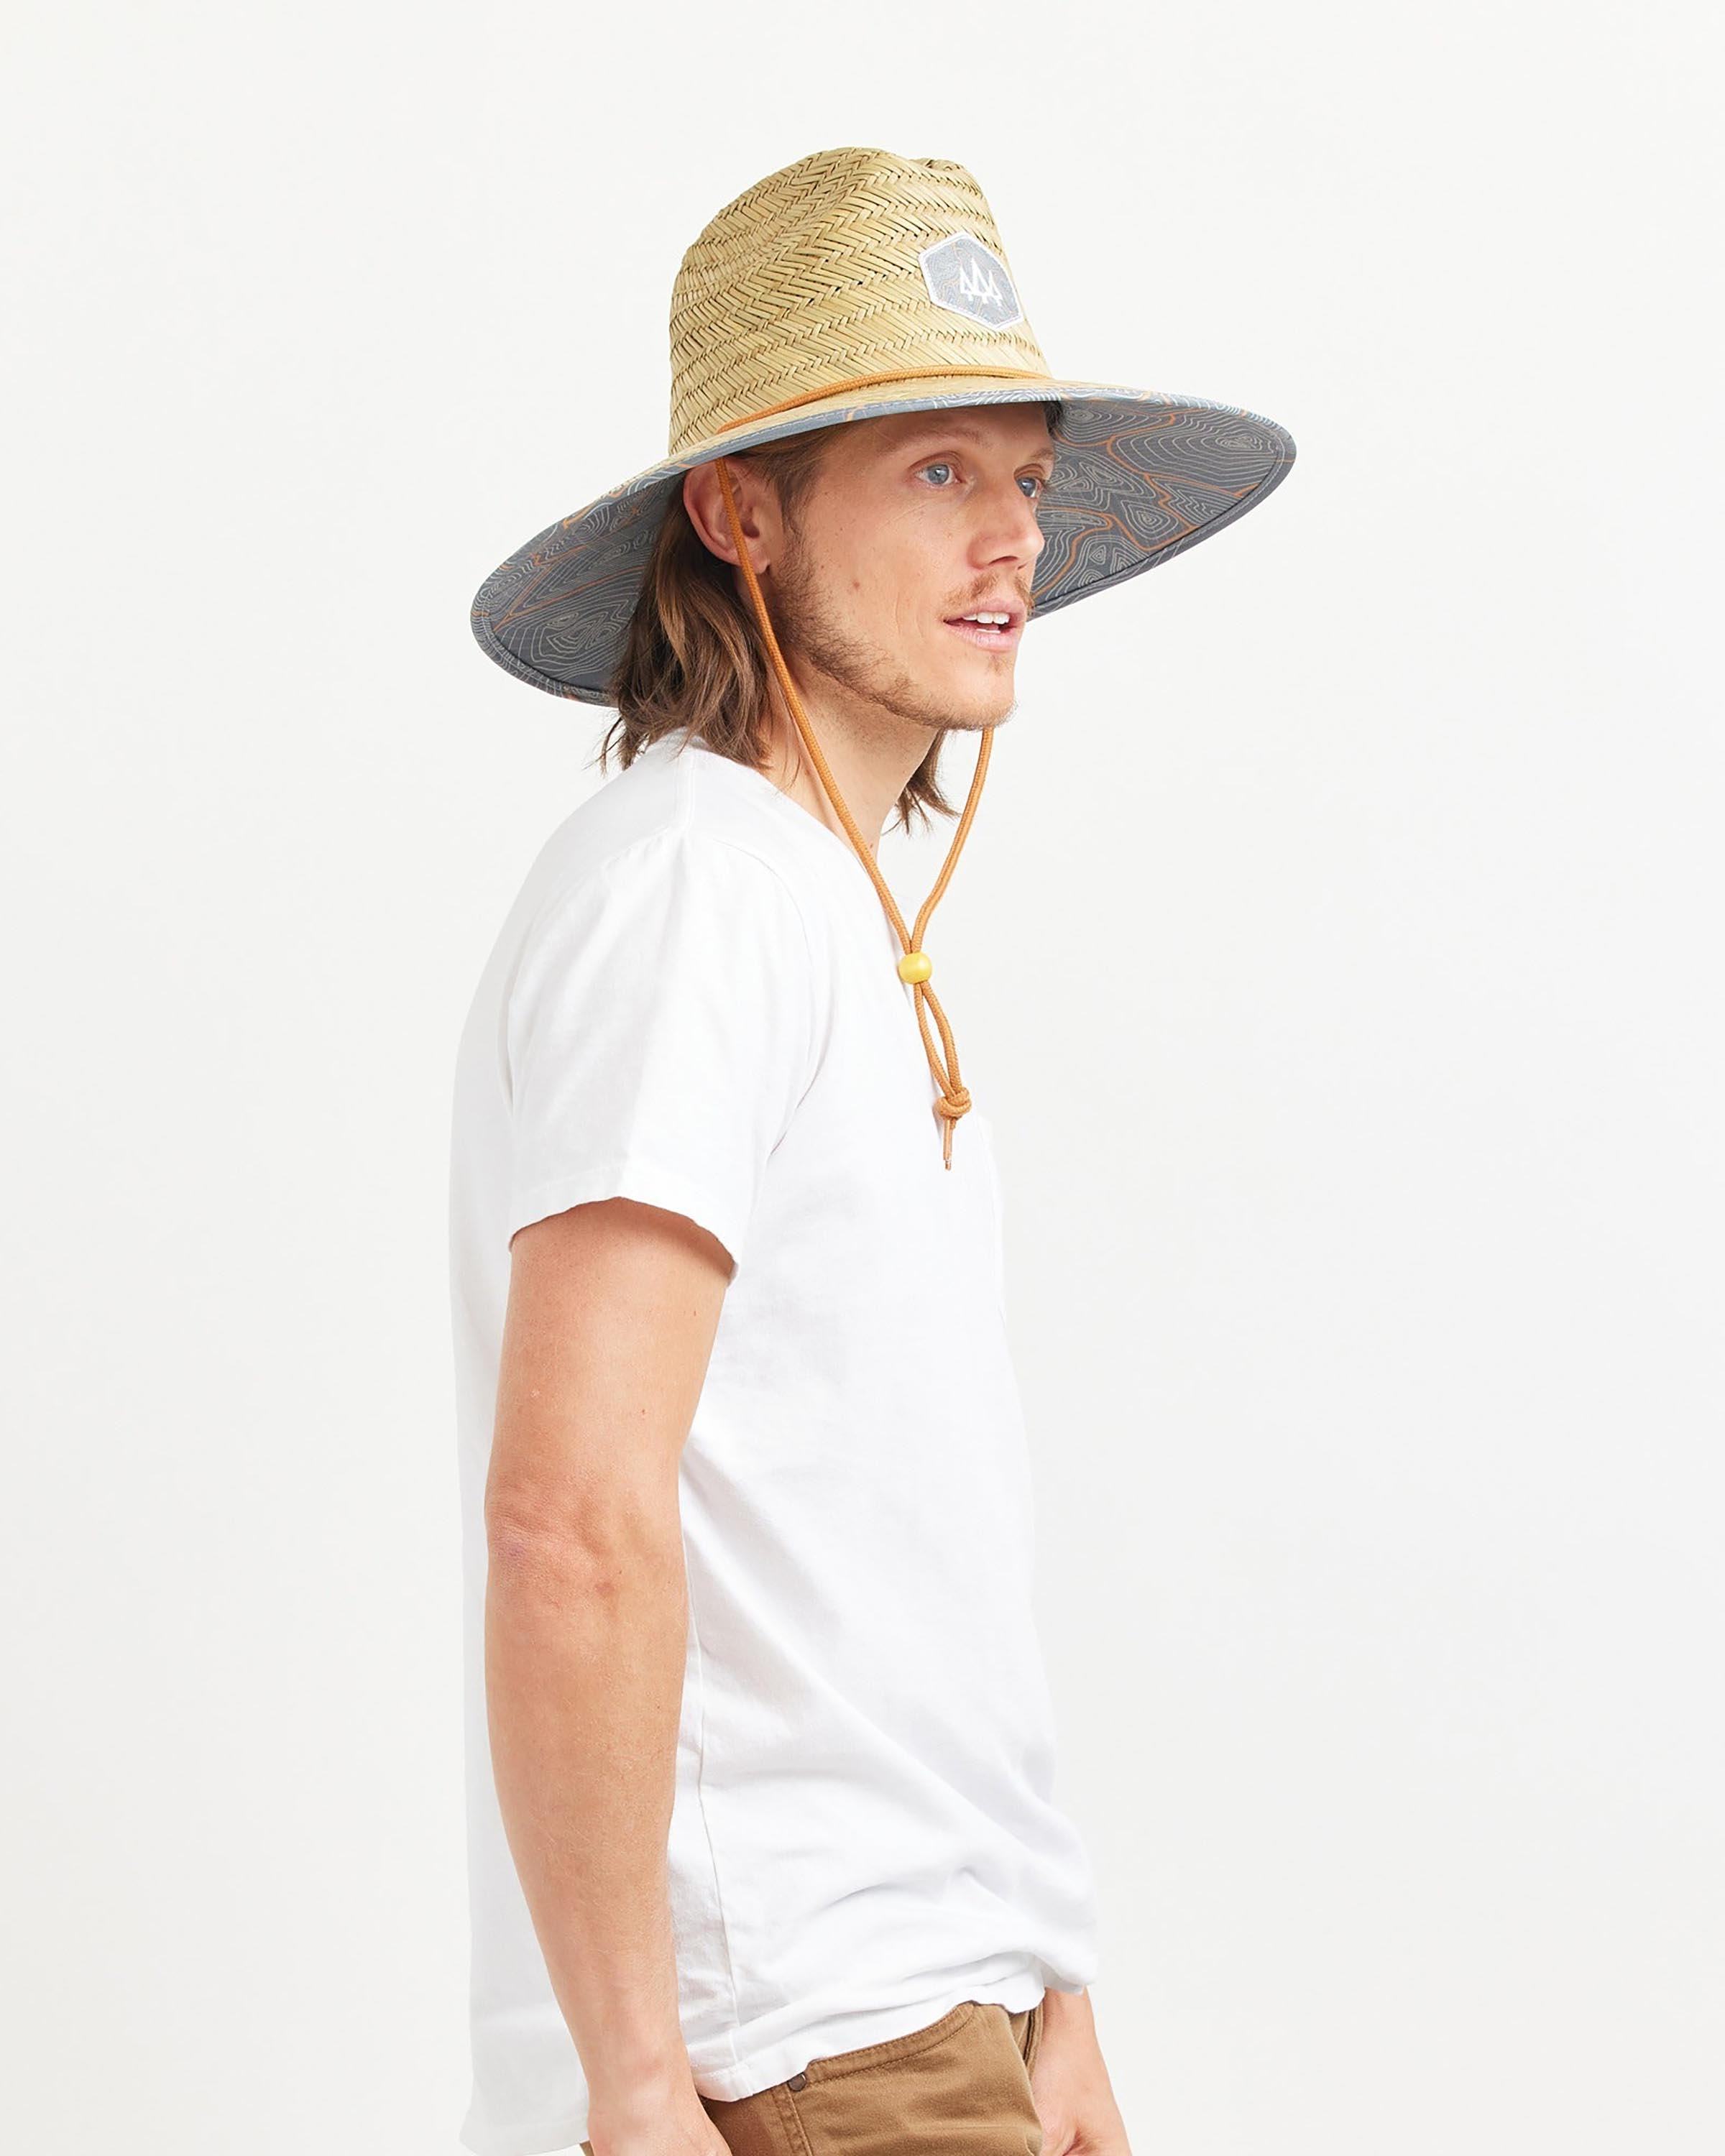 Nomad - undefined - Hemlock Hat Co. Lifeguards - Adults